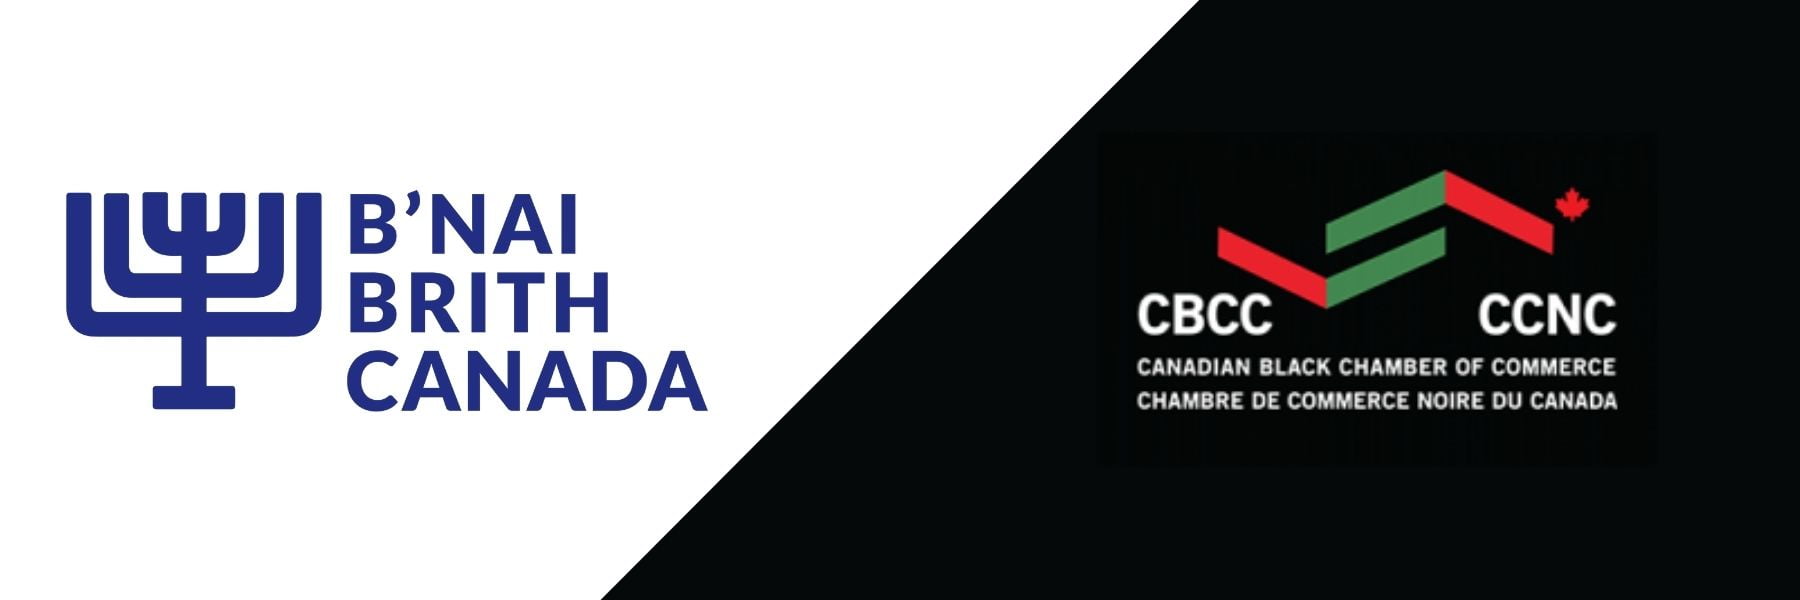 Canadian Black Chamber of Commerce and B'nai Brith to Join Forces - B ...